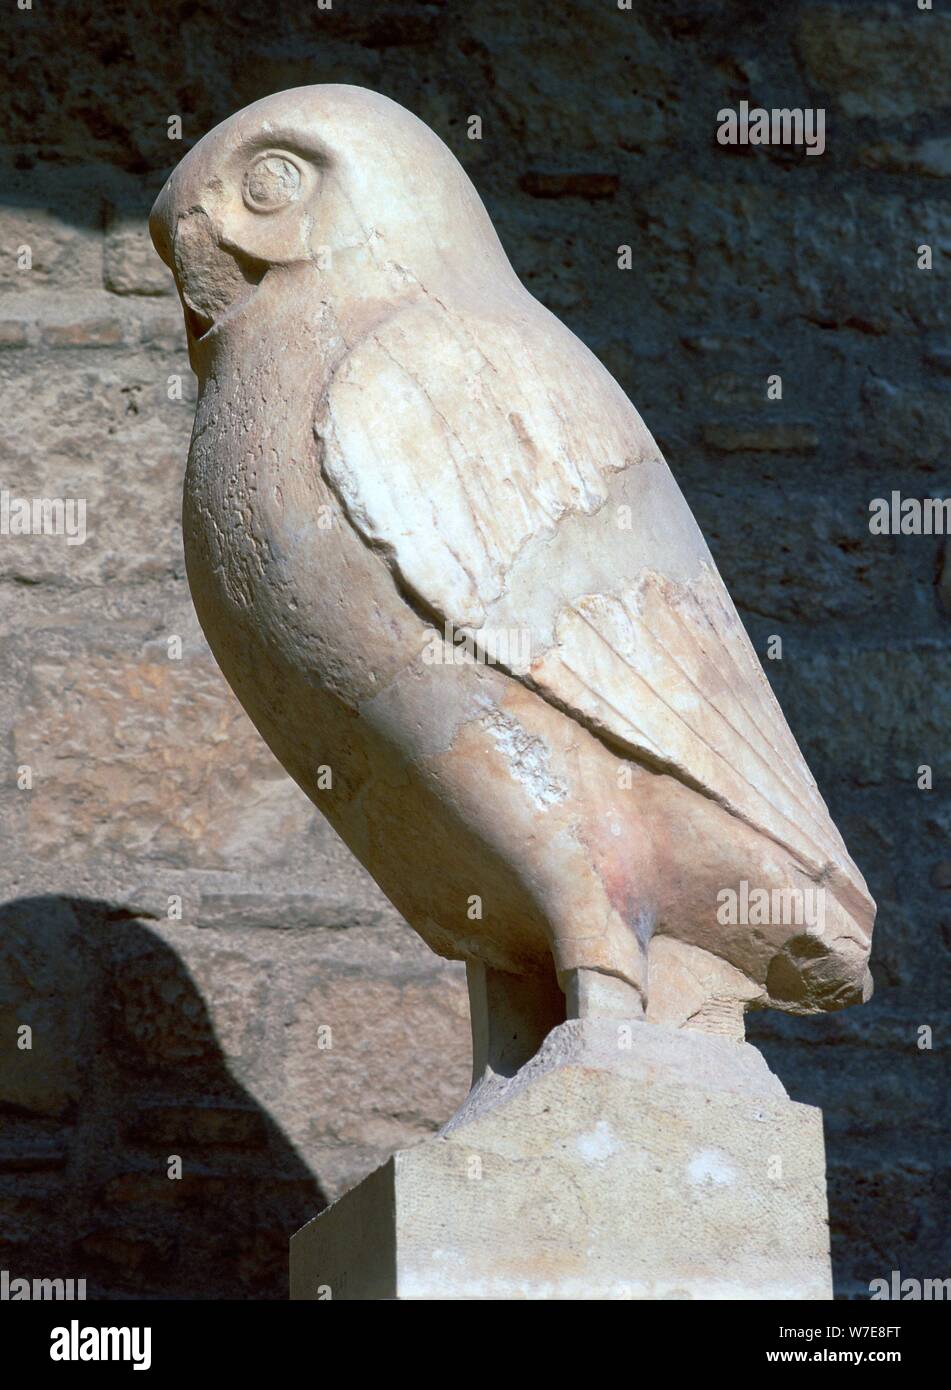 Statuette of an owl from the Acropolis. Artist: Unknown Stock Photo